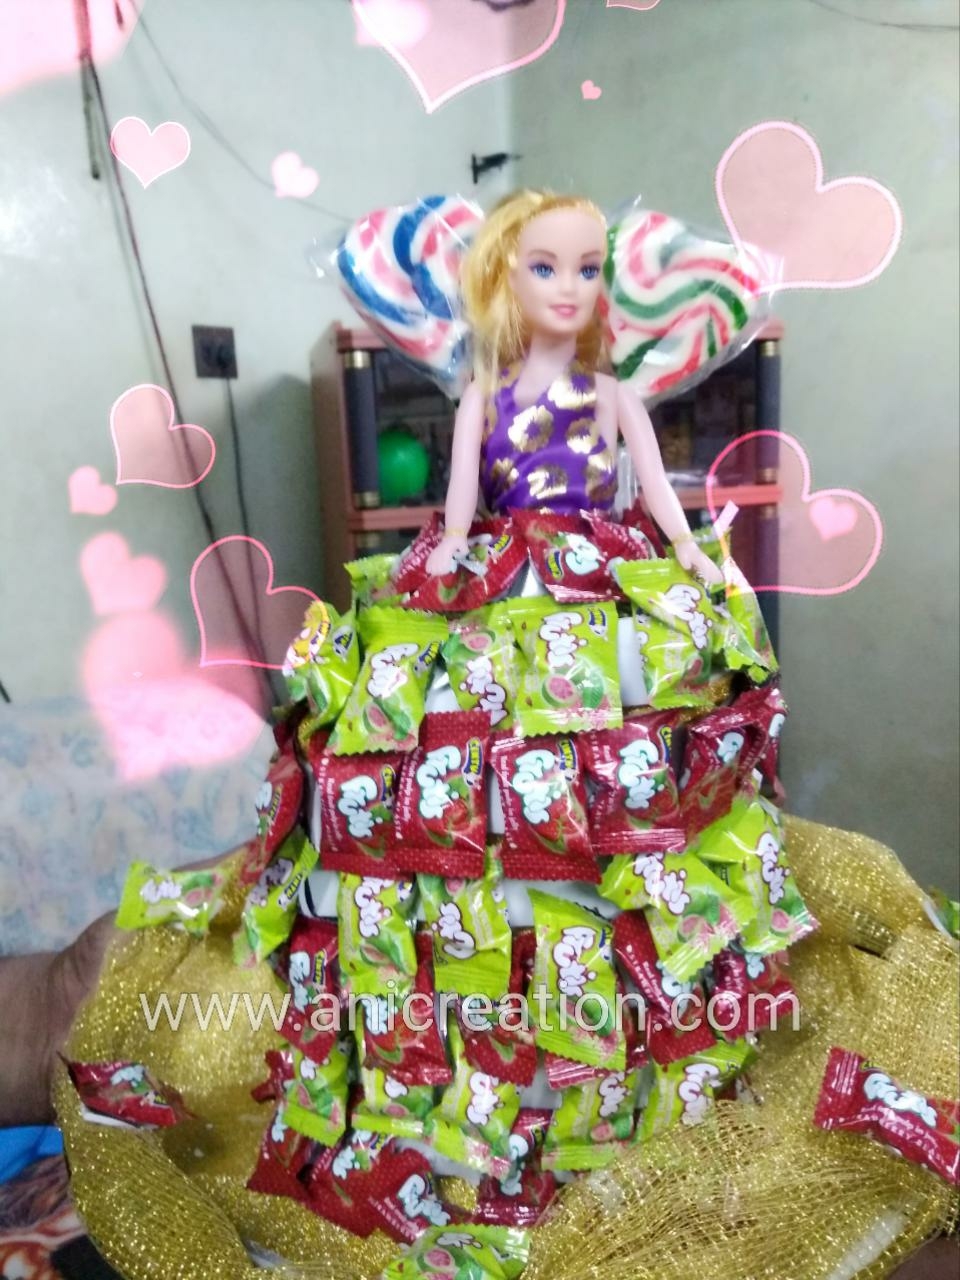 Doll Candy Decor centerpiece for birthday party